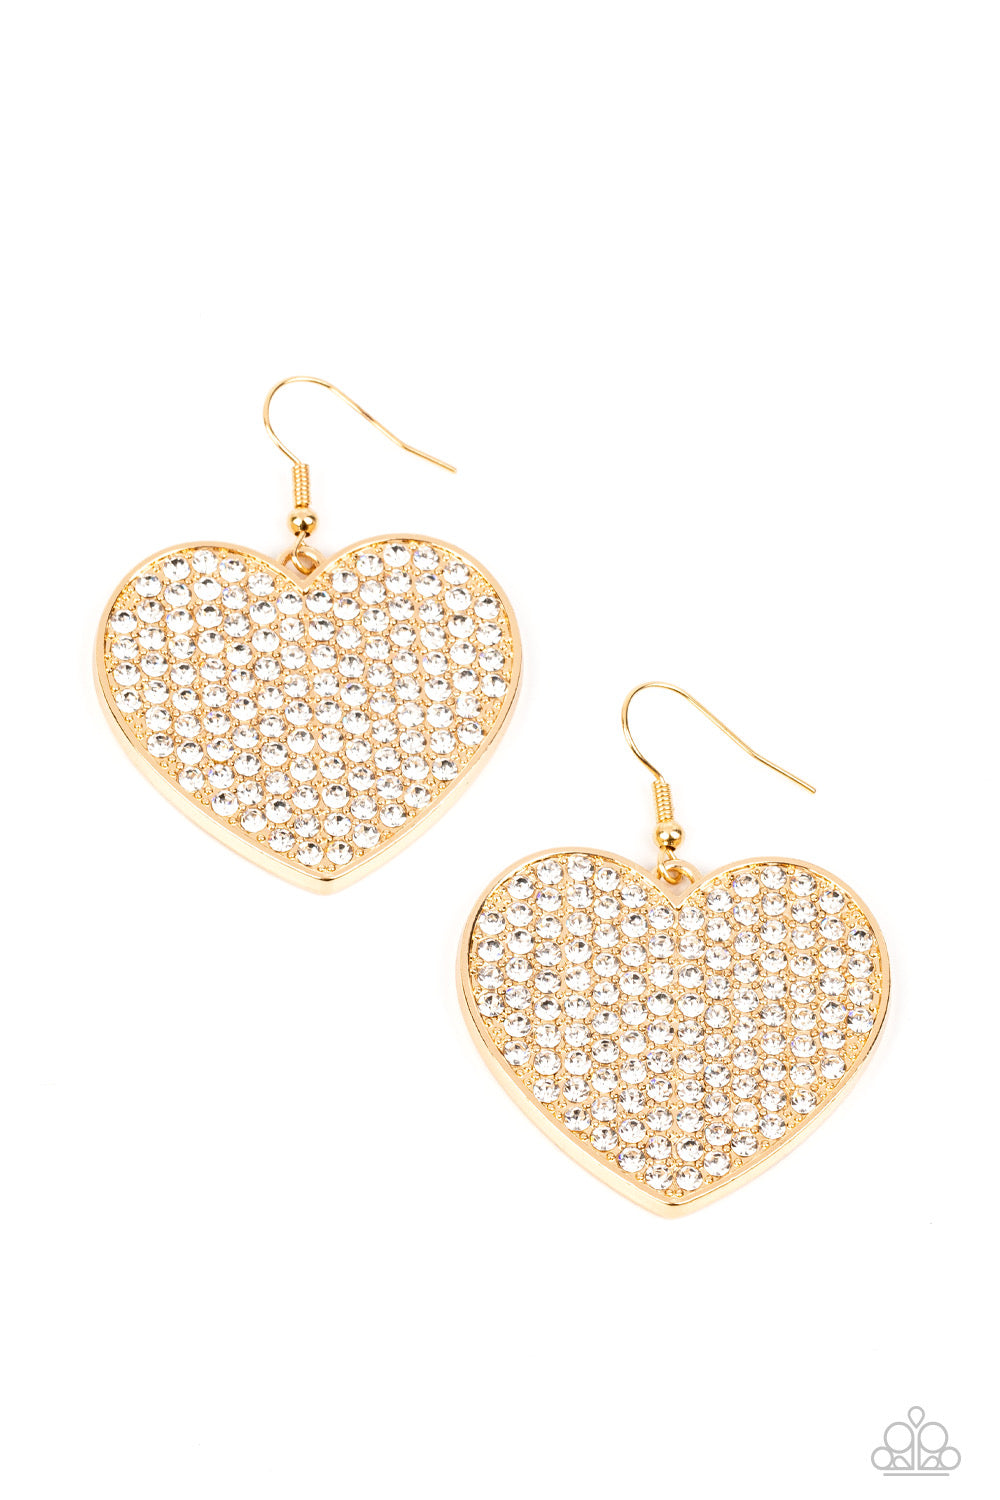 Paparazzi Romantic Reign - Gold Earrings   -Paparazzi Jewelry Images 